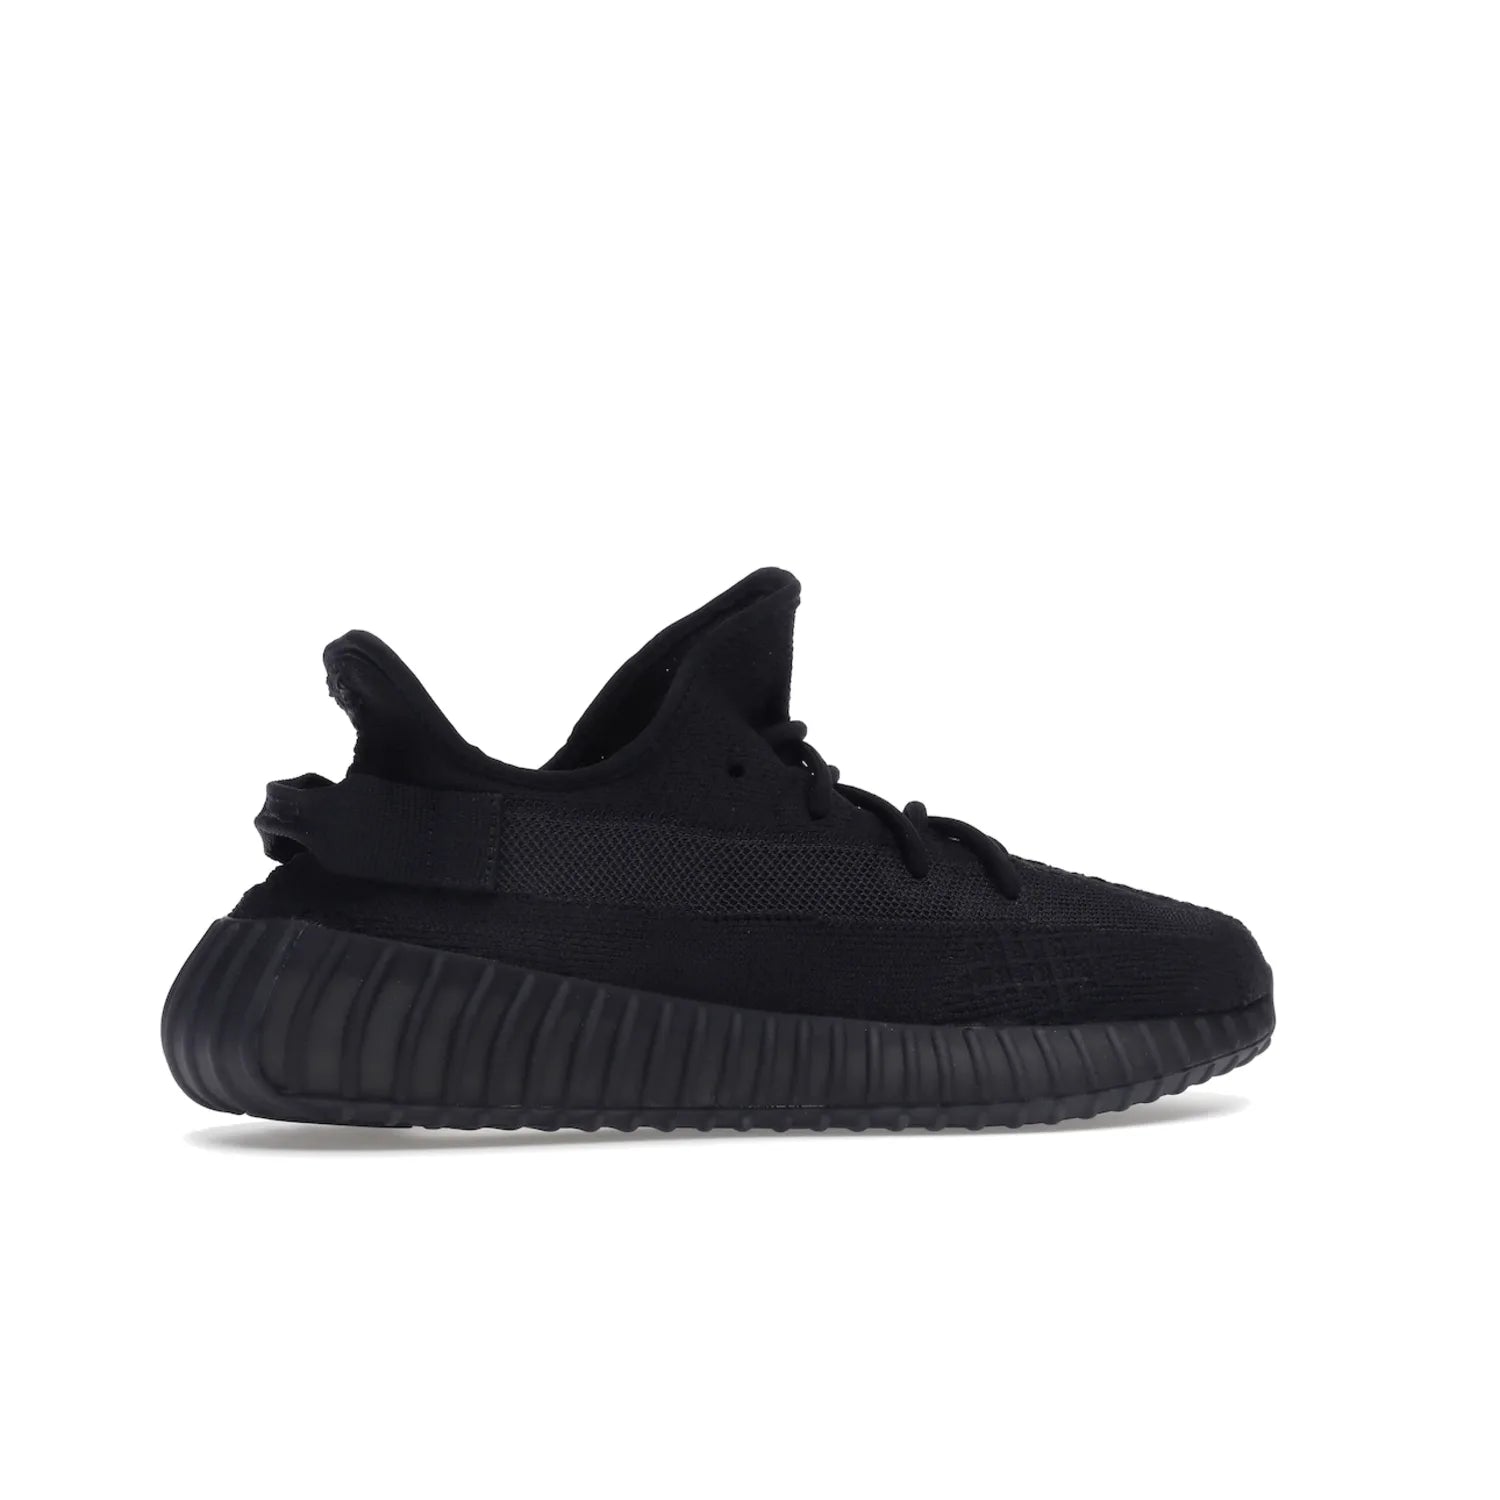 adidas Yeezy Boost 350 V2 Onyx - Image 35 - Only at www.BallersClubKickz.com - Adidas Yeezy Boost 350 V2 Onyx Triple Black shoes for comfort and style. Arriving Spring 2022.